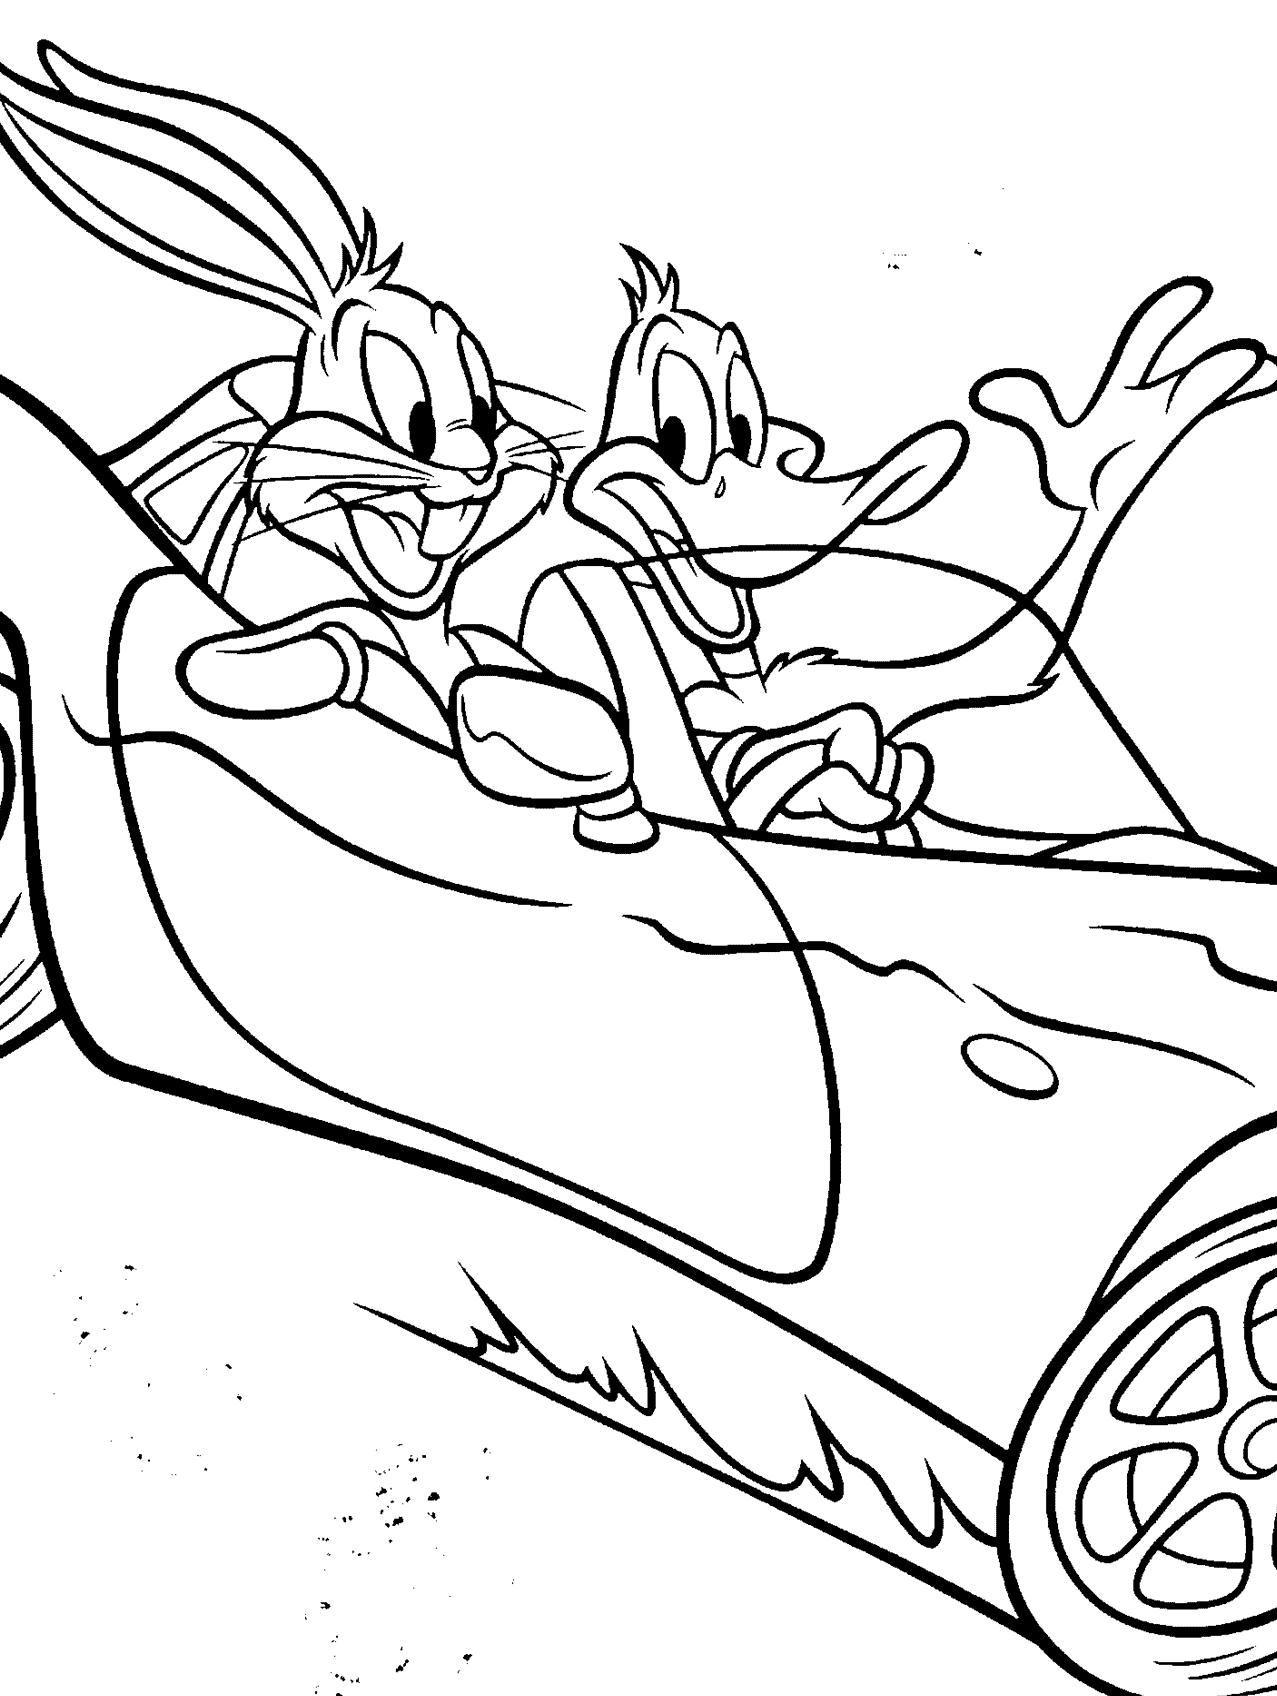 Printable Bugs Bunny Coloring Pages - Coloring Home